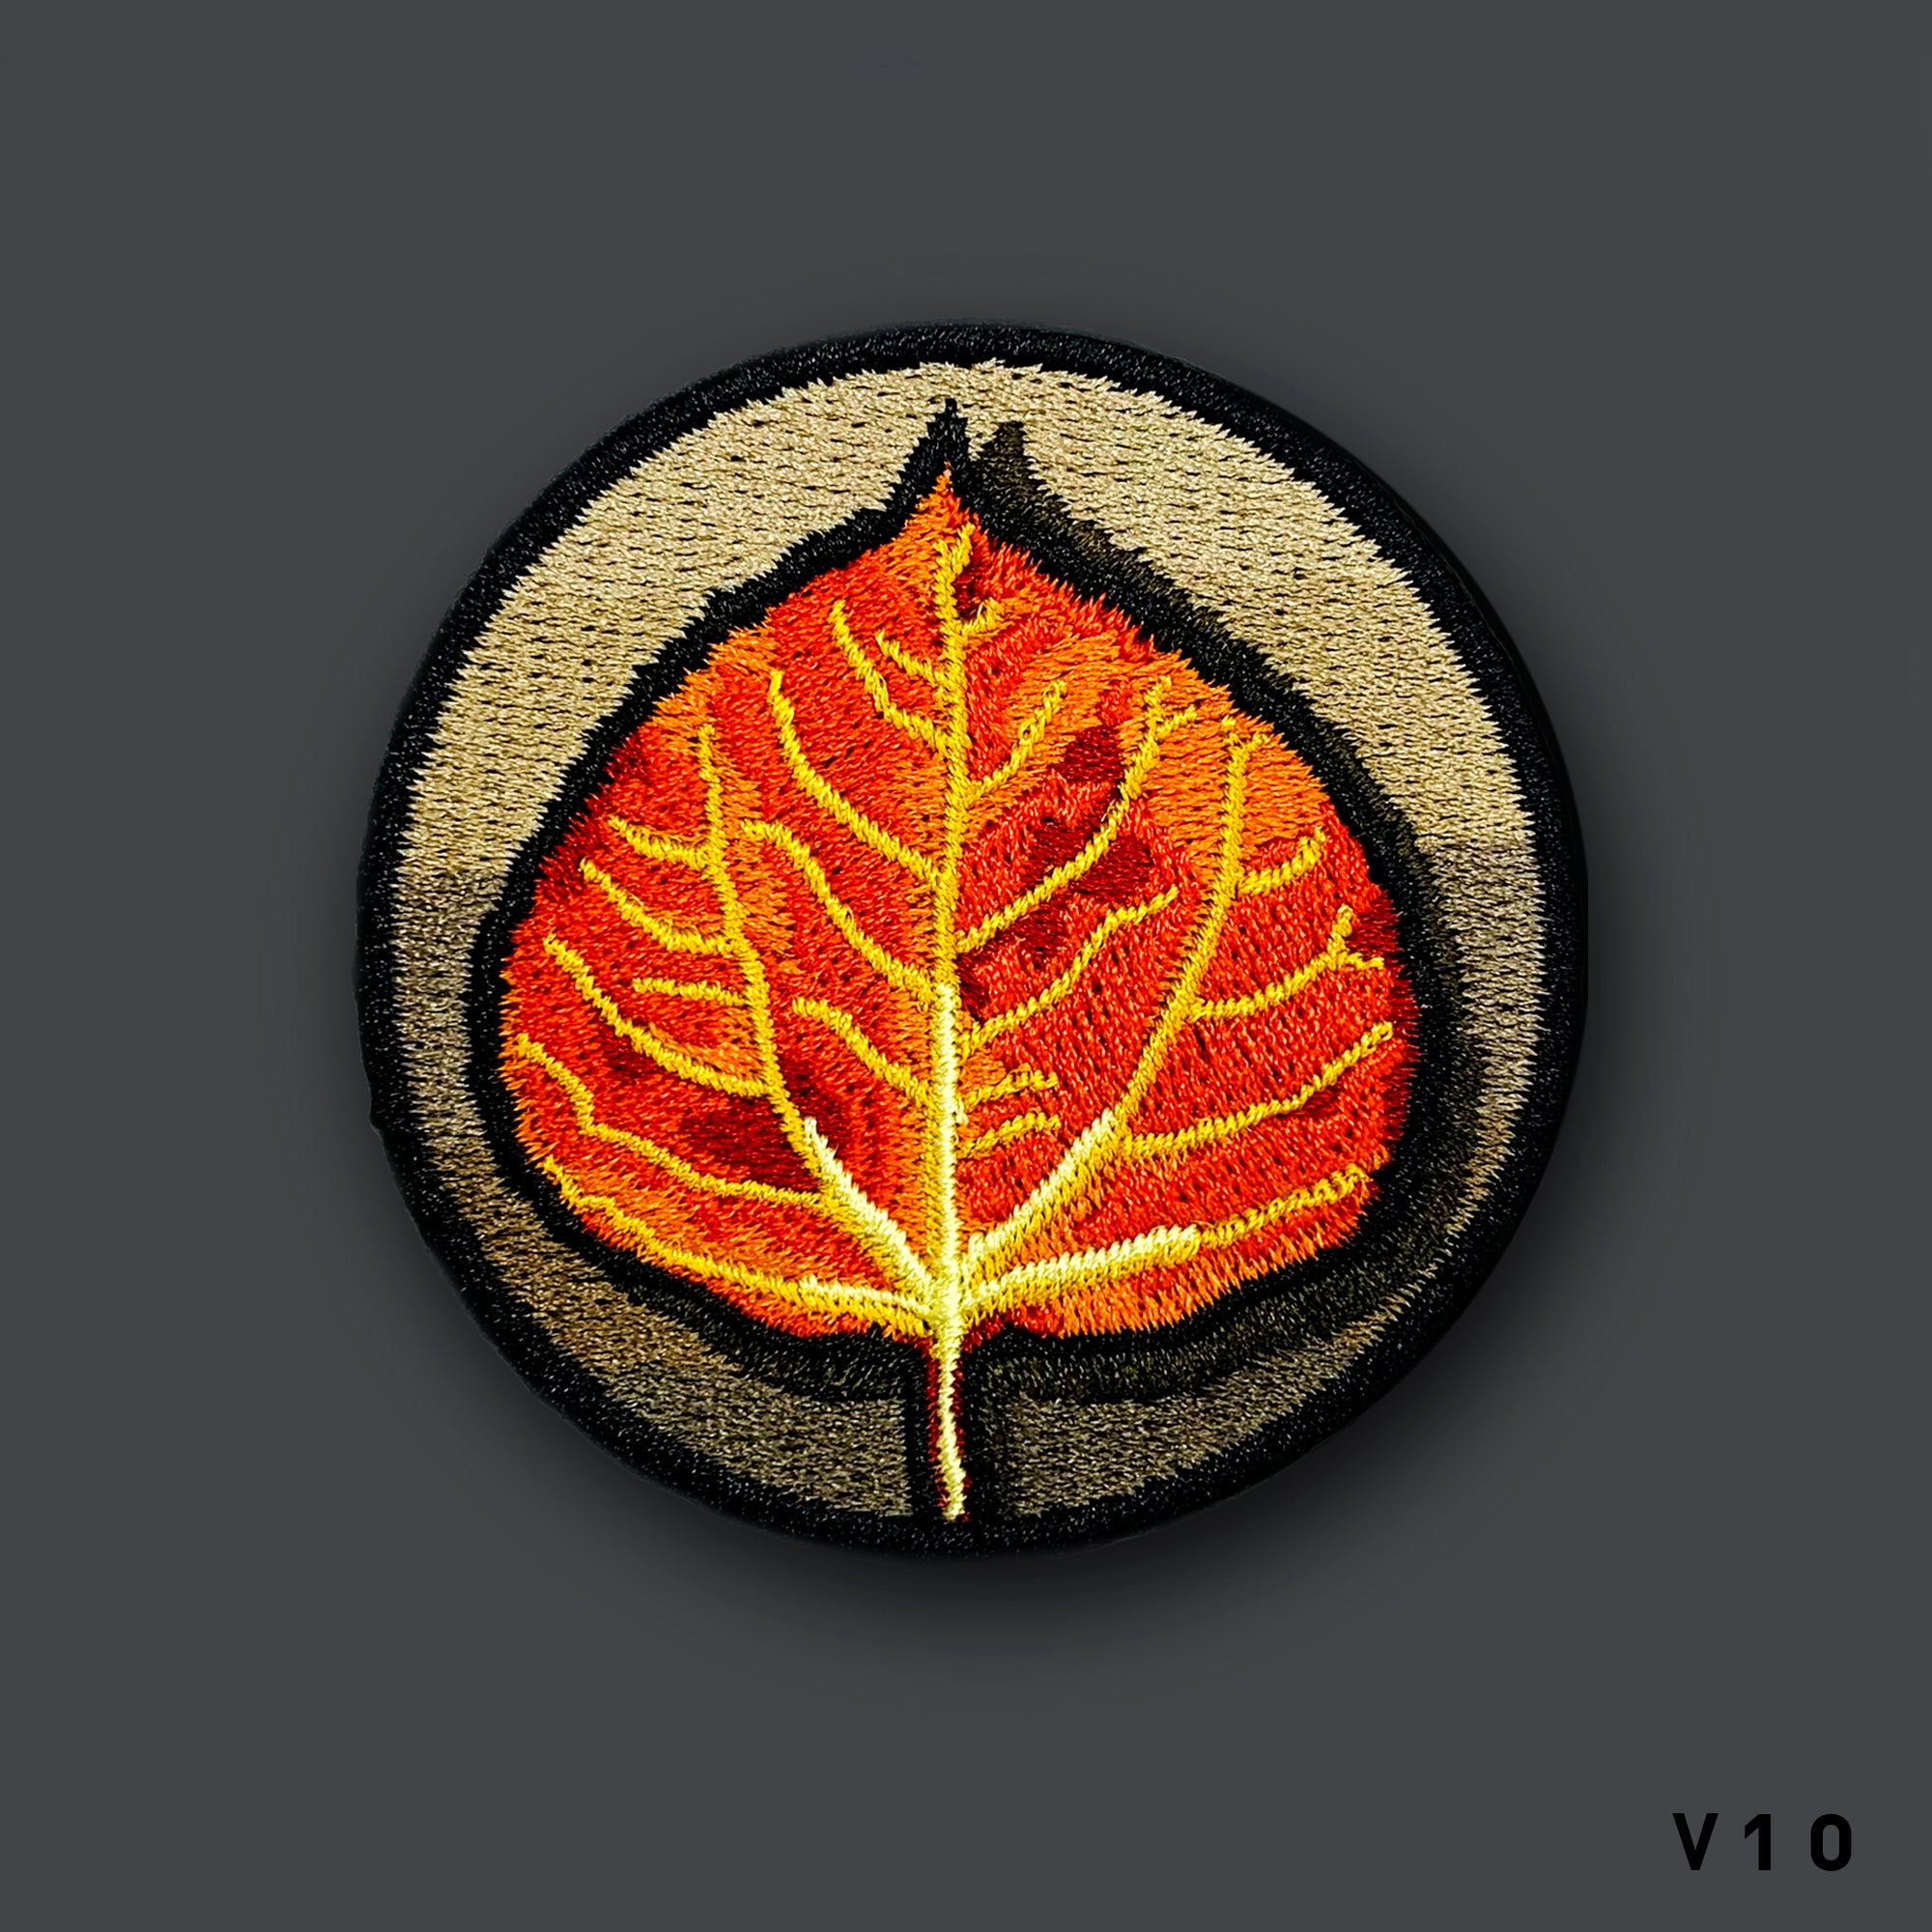 Adventure Wearables V10 "Fall Leaf" Morale Patch